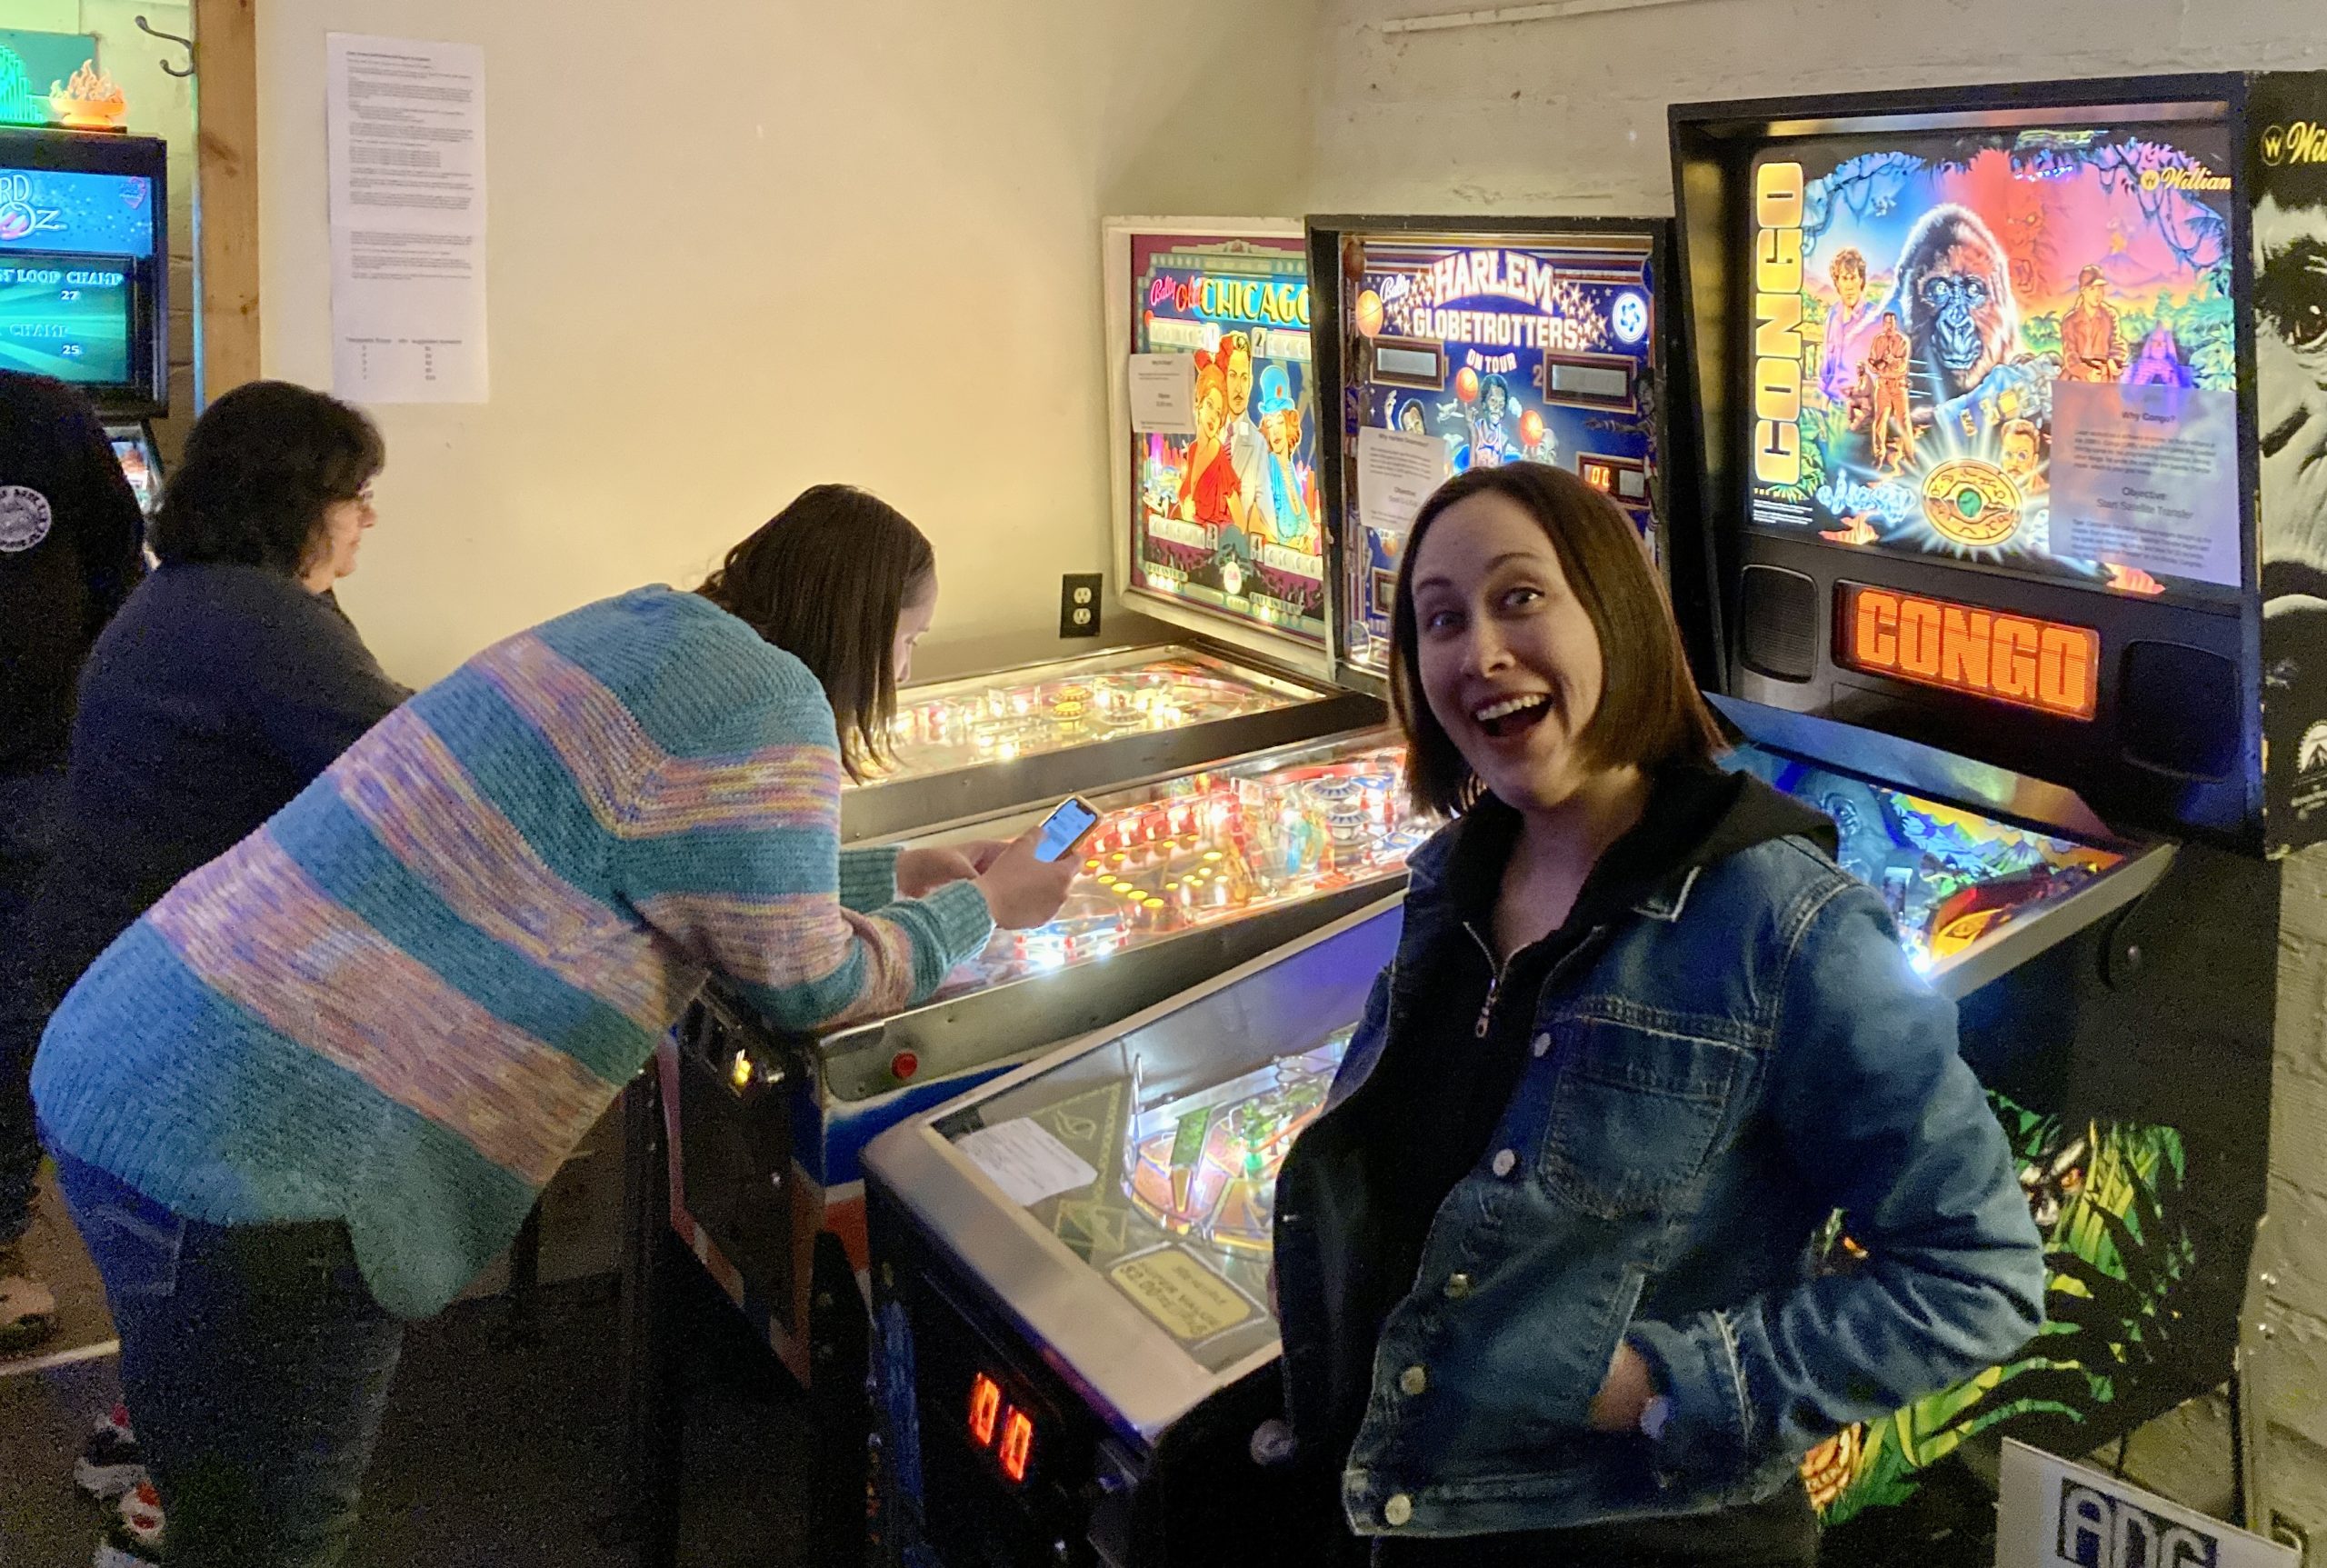 People playing pinball, woman is in foreground smiling.